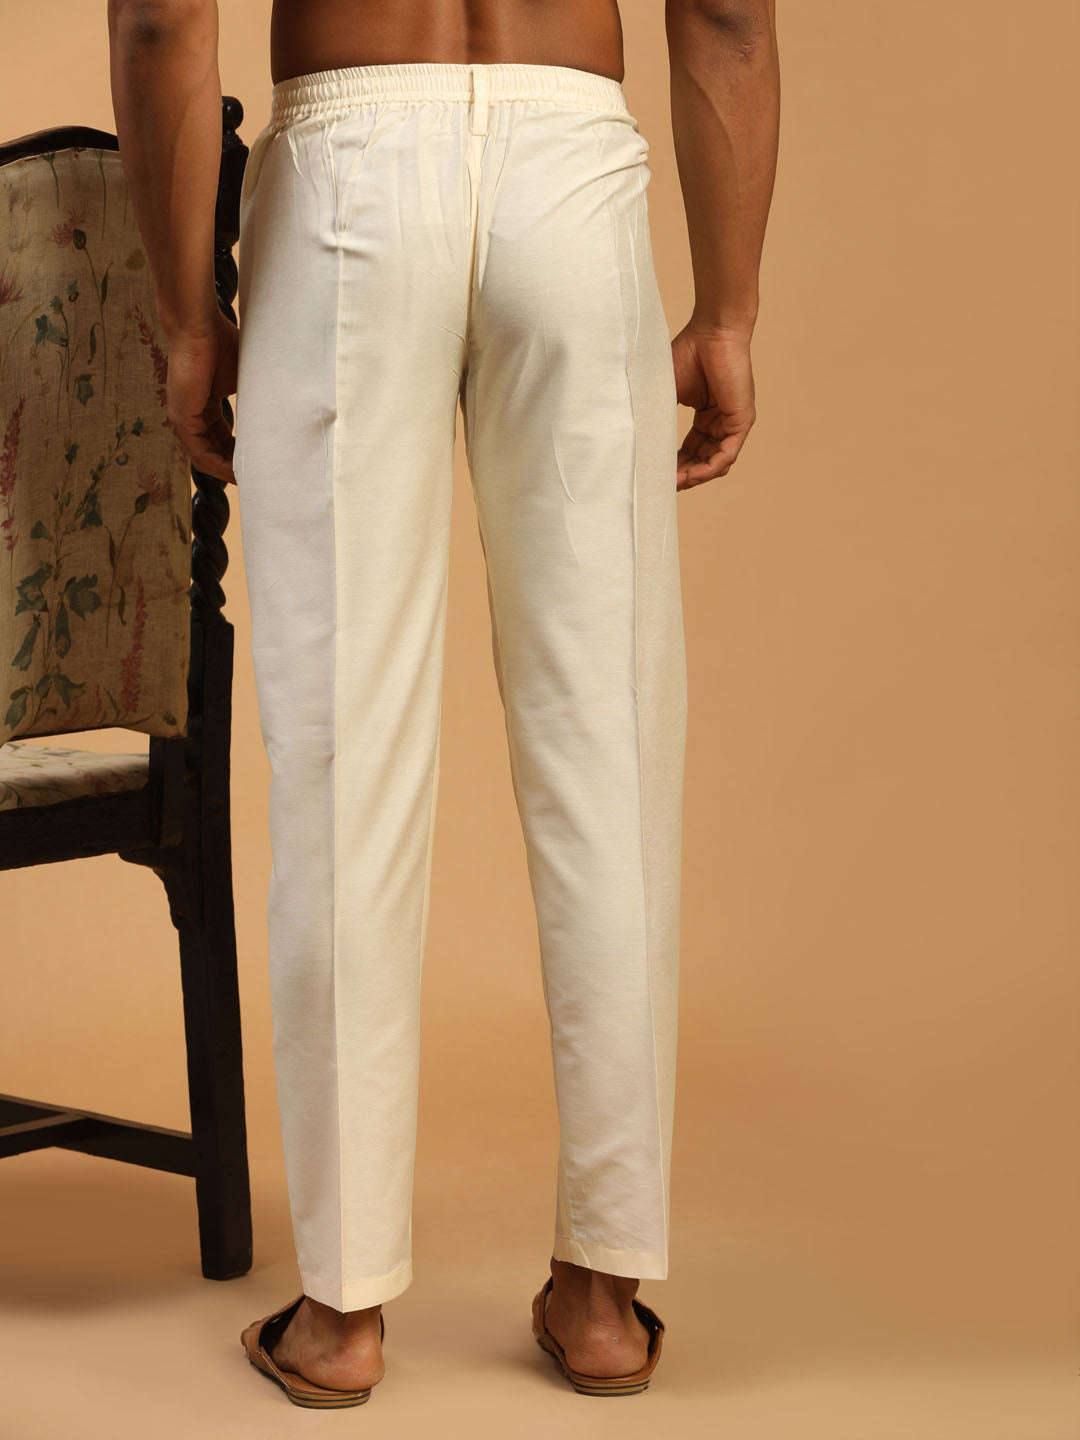 Buy Beige Narrow Pant Cotton Khadi Narrow Pant for Best Price, Reviews,  Free Shipping